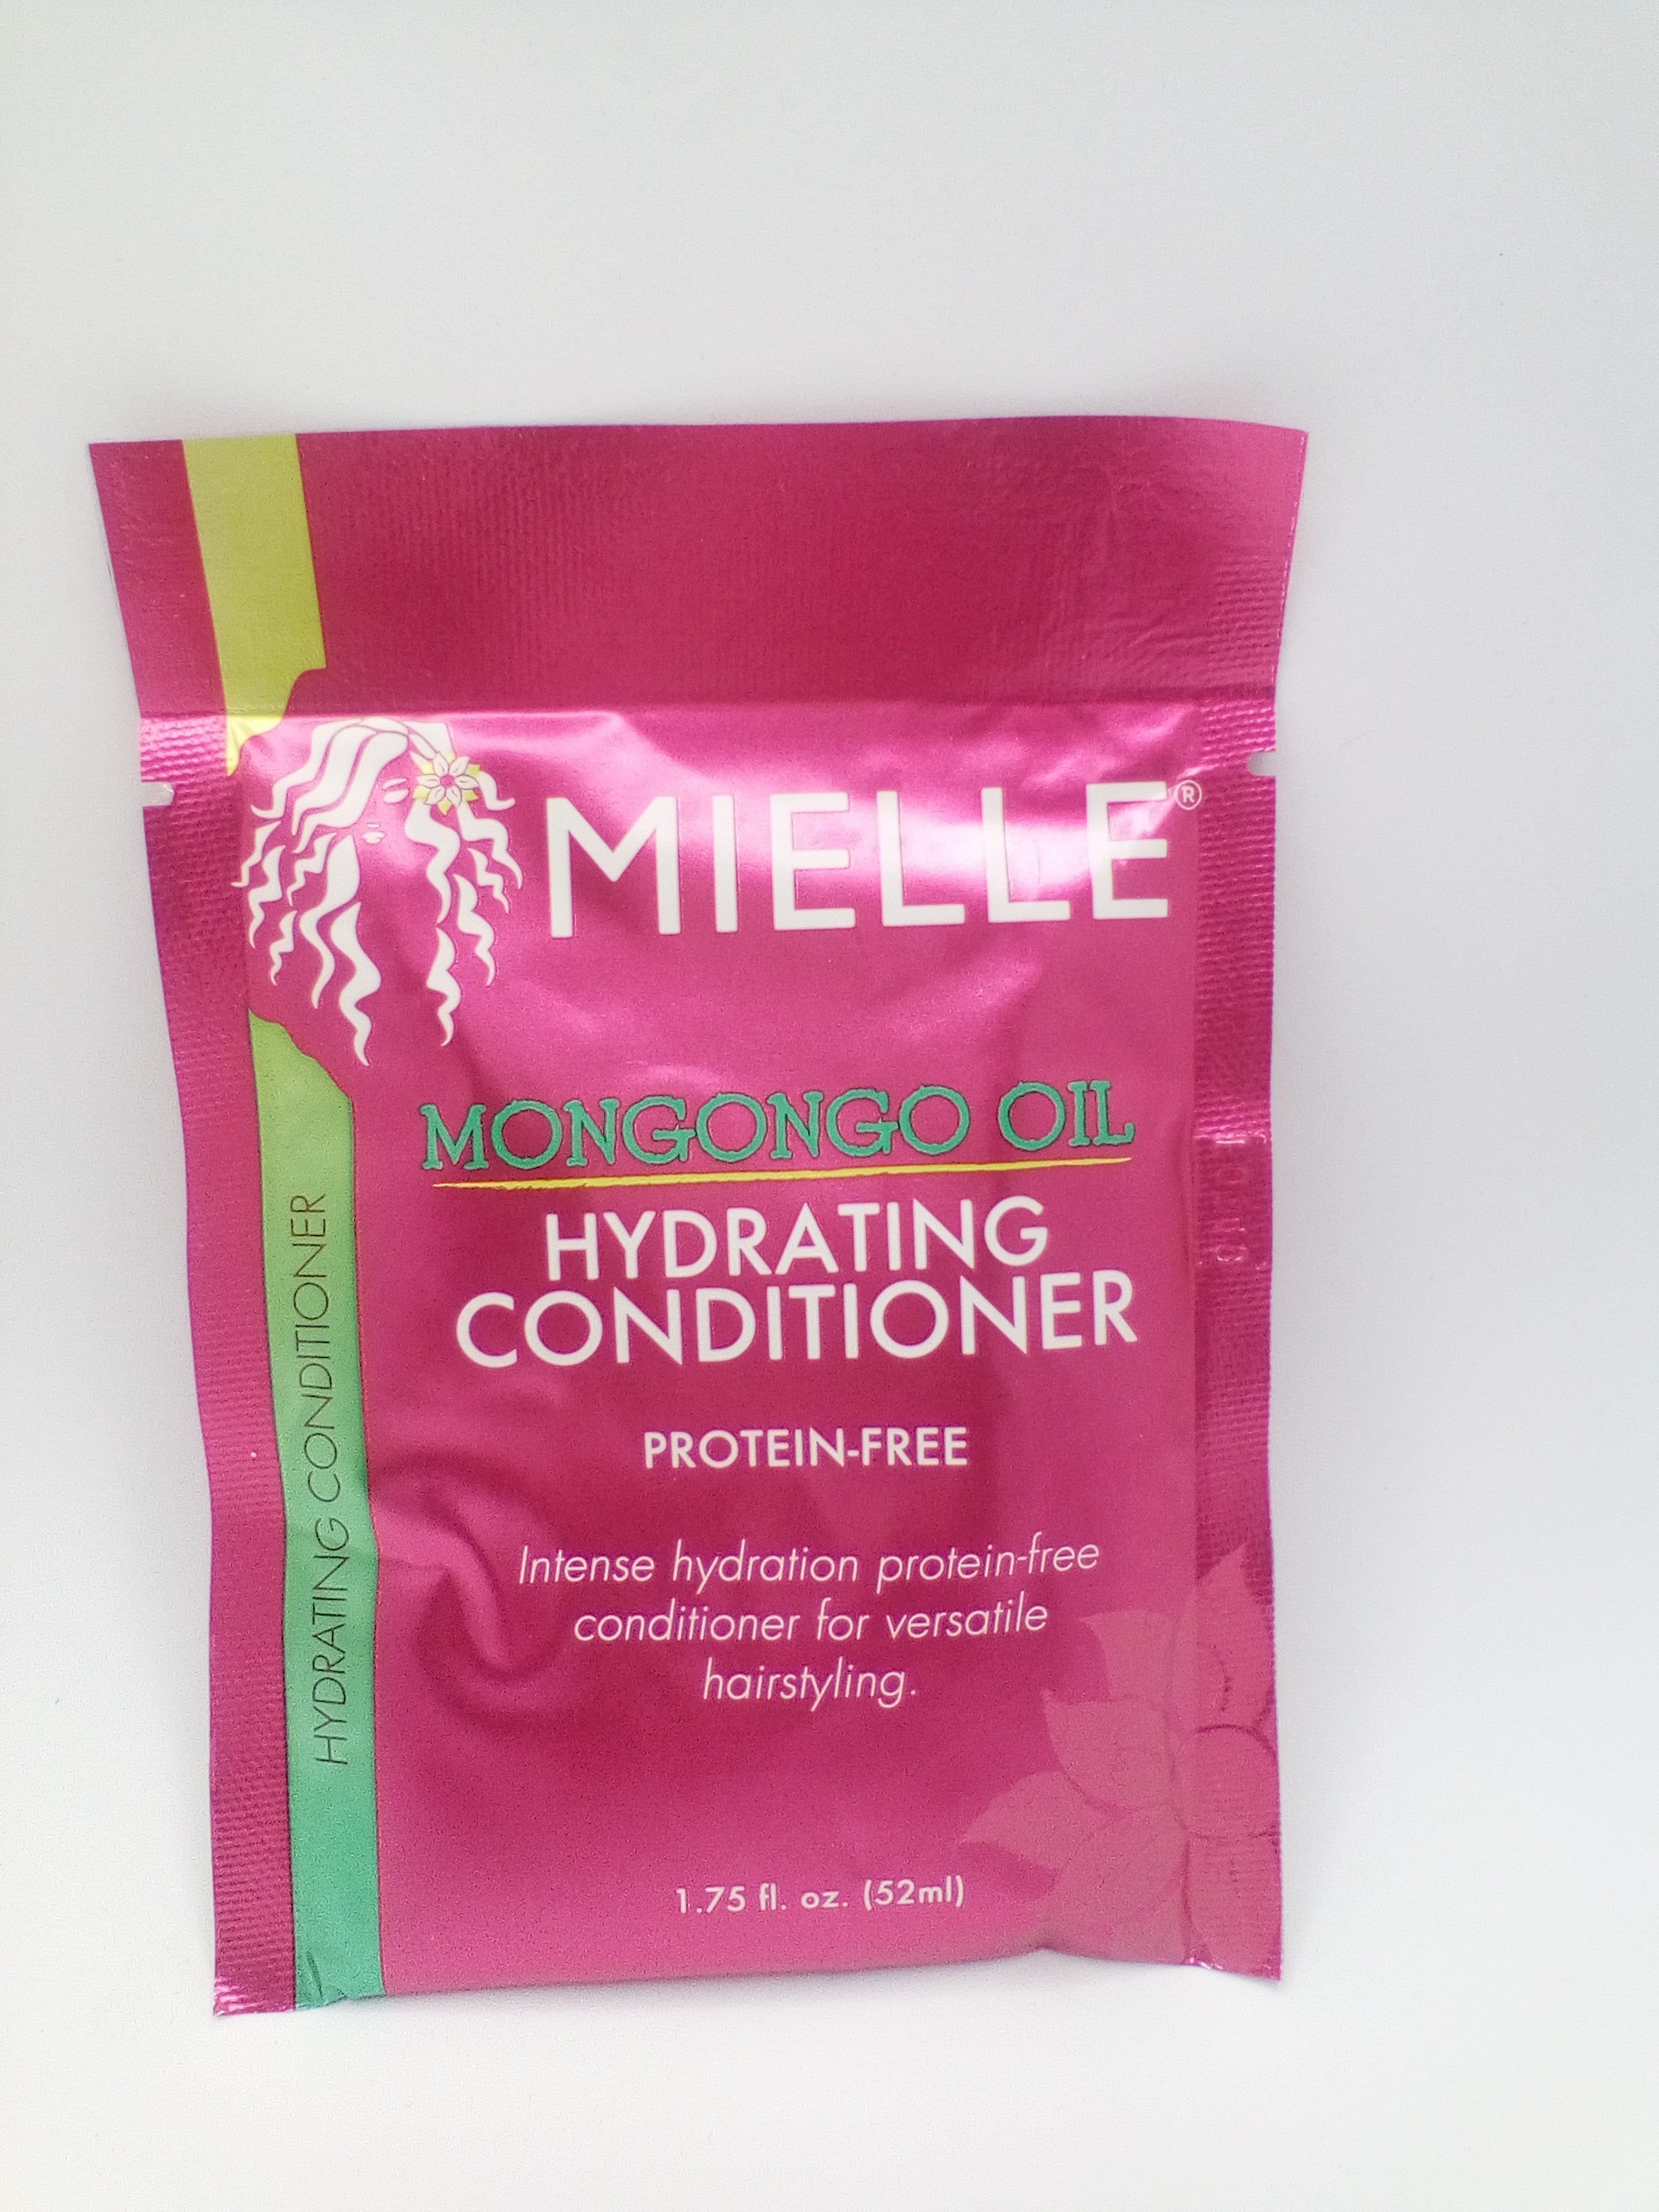 Mielle Organics Mongongo Oil Hydrating Conditioner Sample Pack - Beauty Bar & Supply